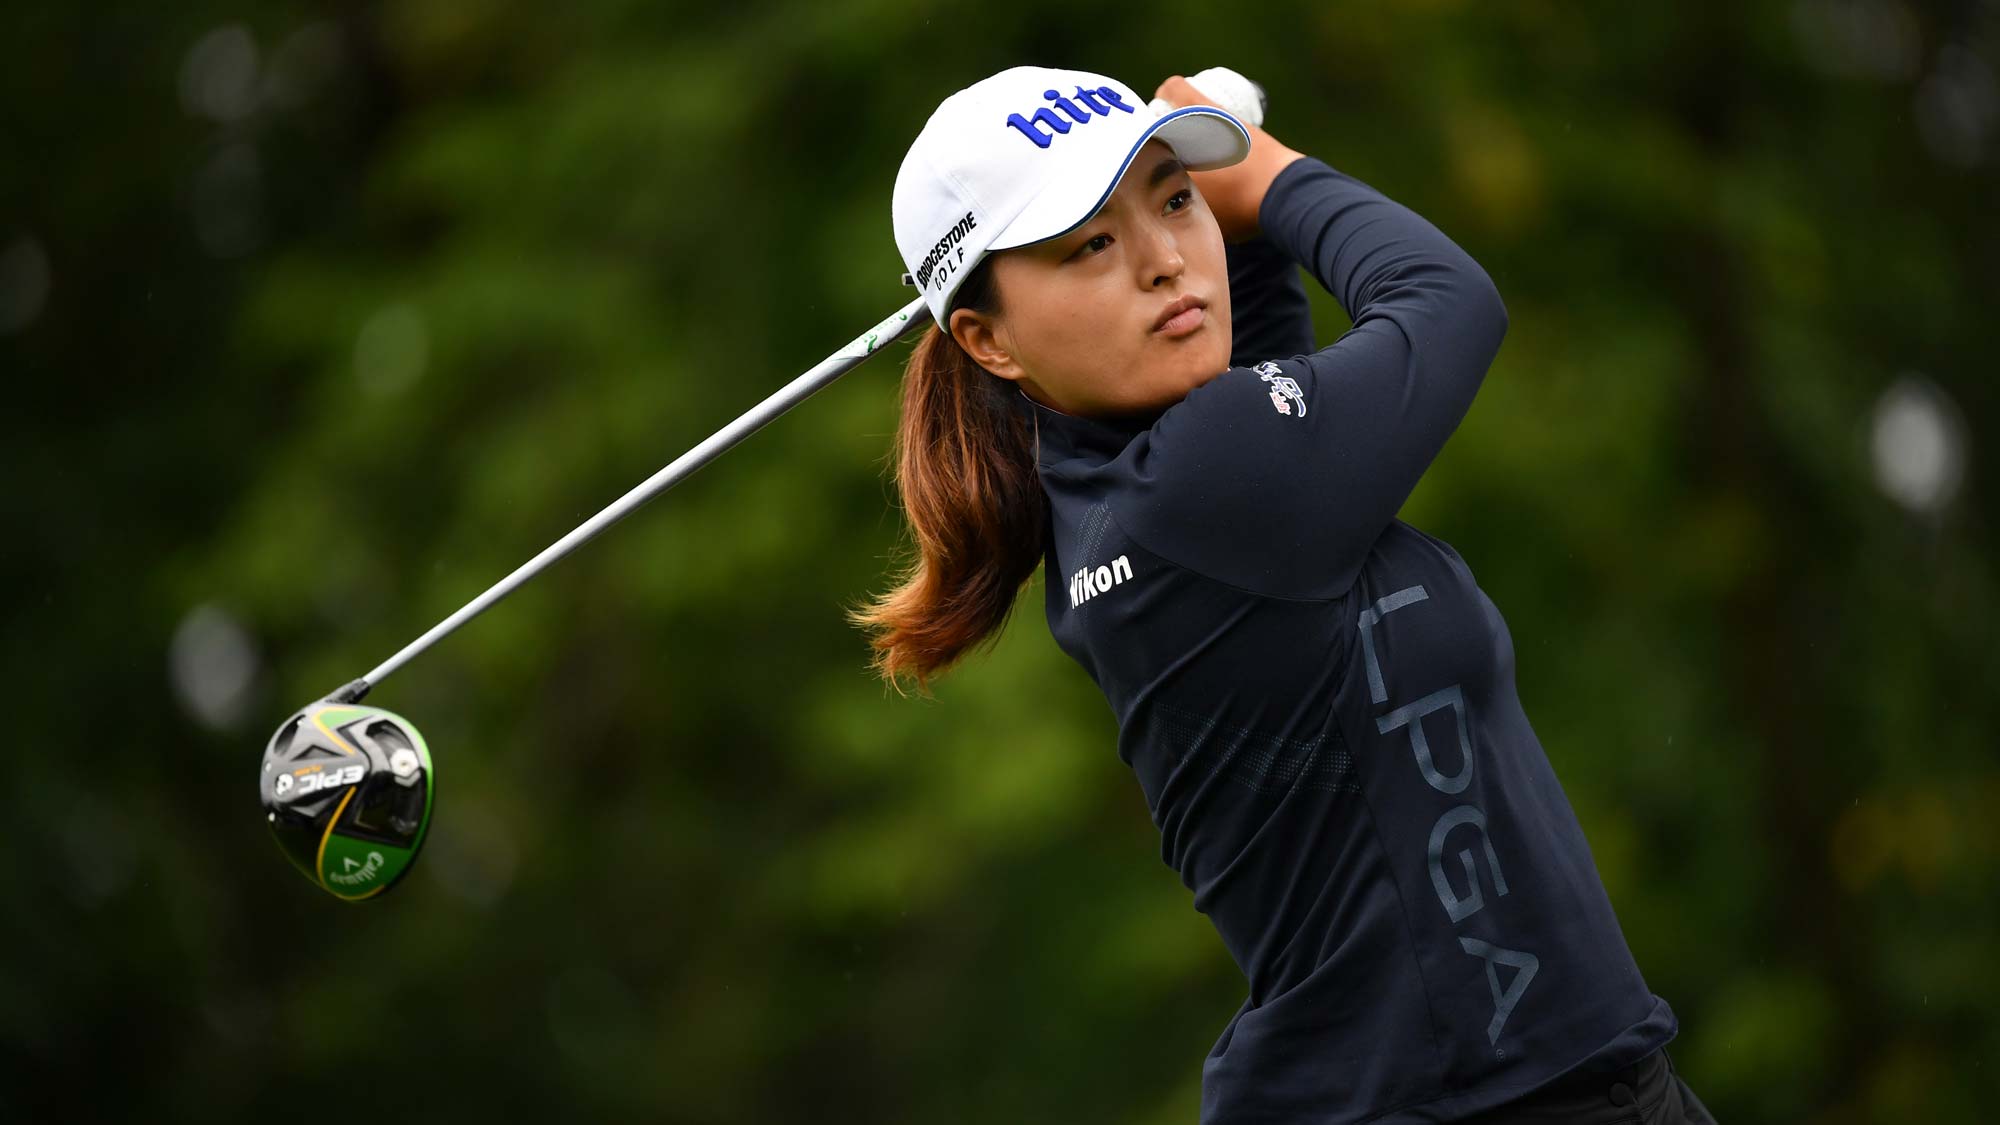 Jin Young Ko of South Korea in action on the 9th hole during day 4 of the Evian Championship